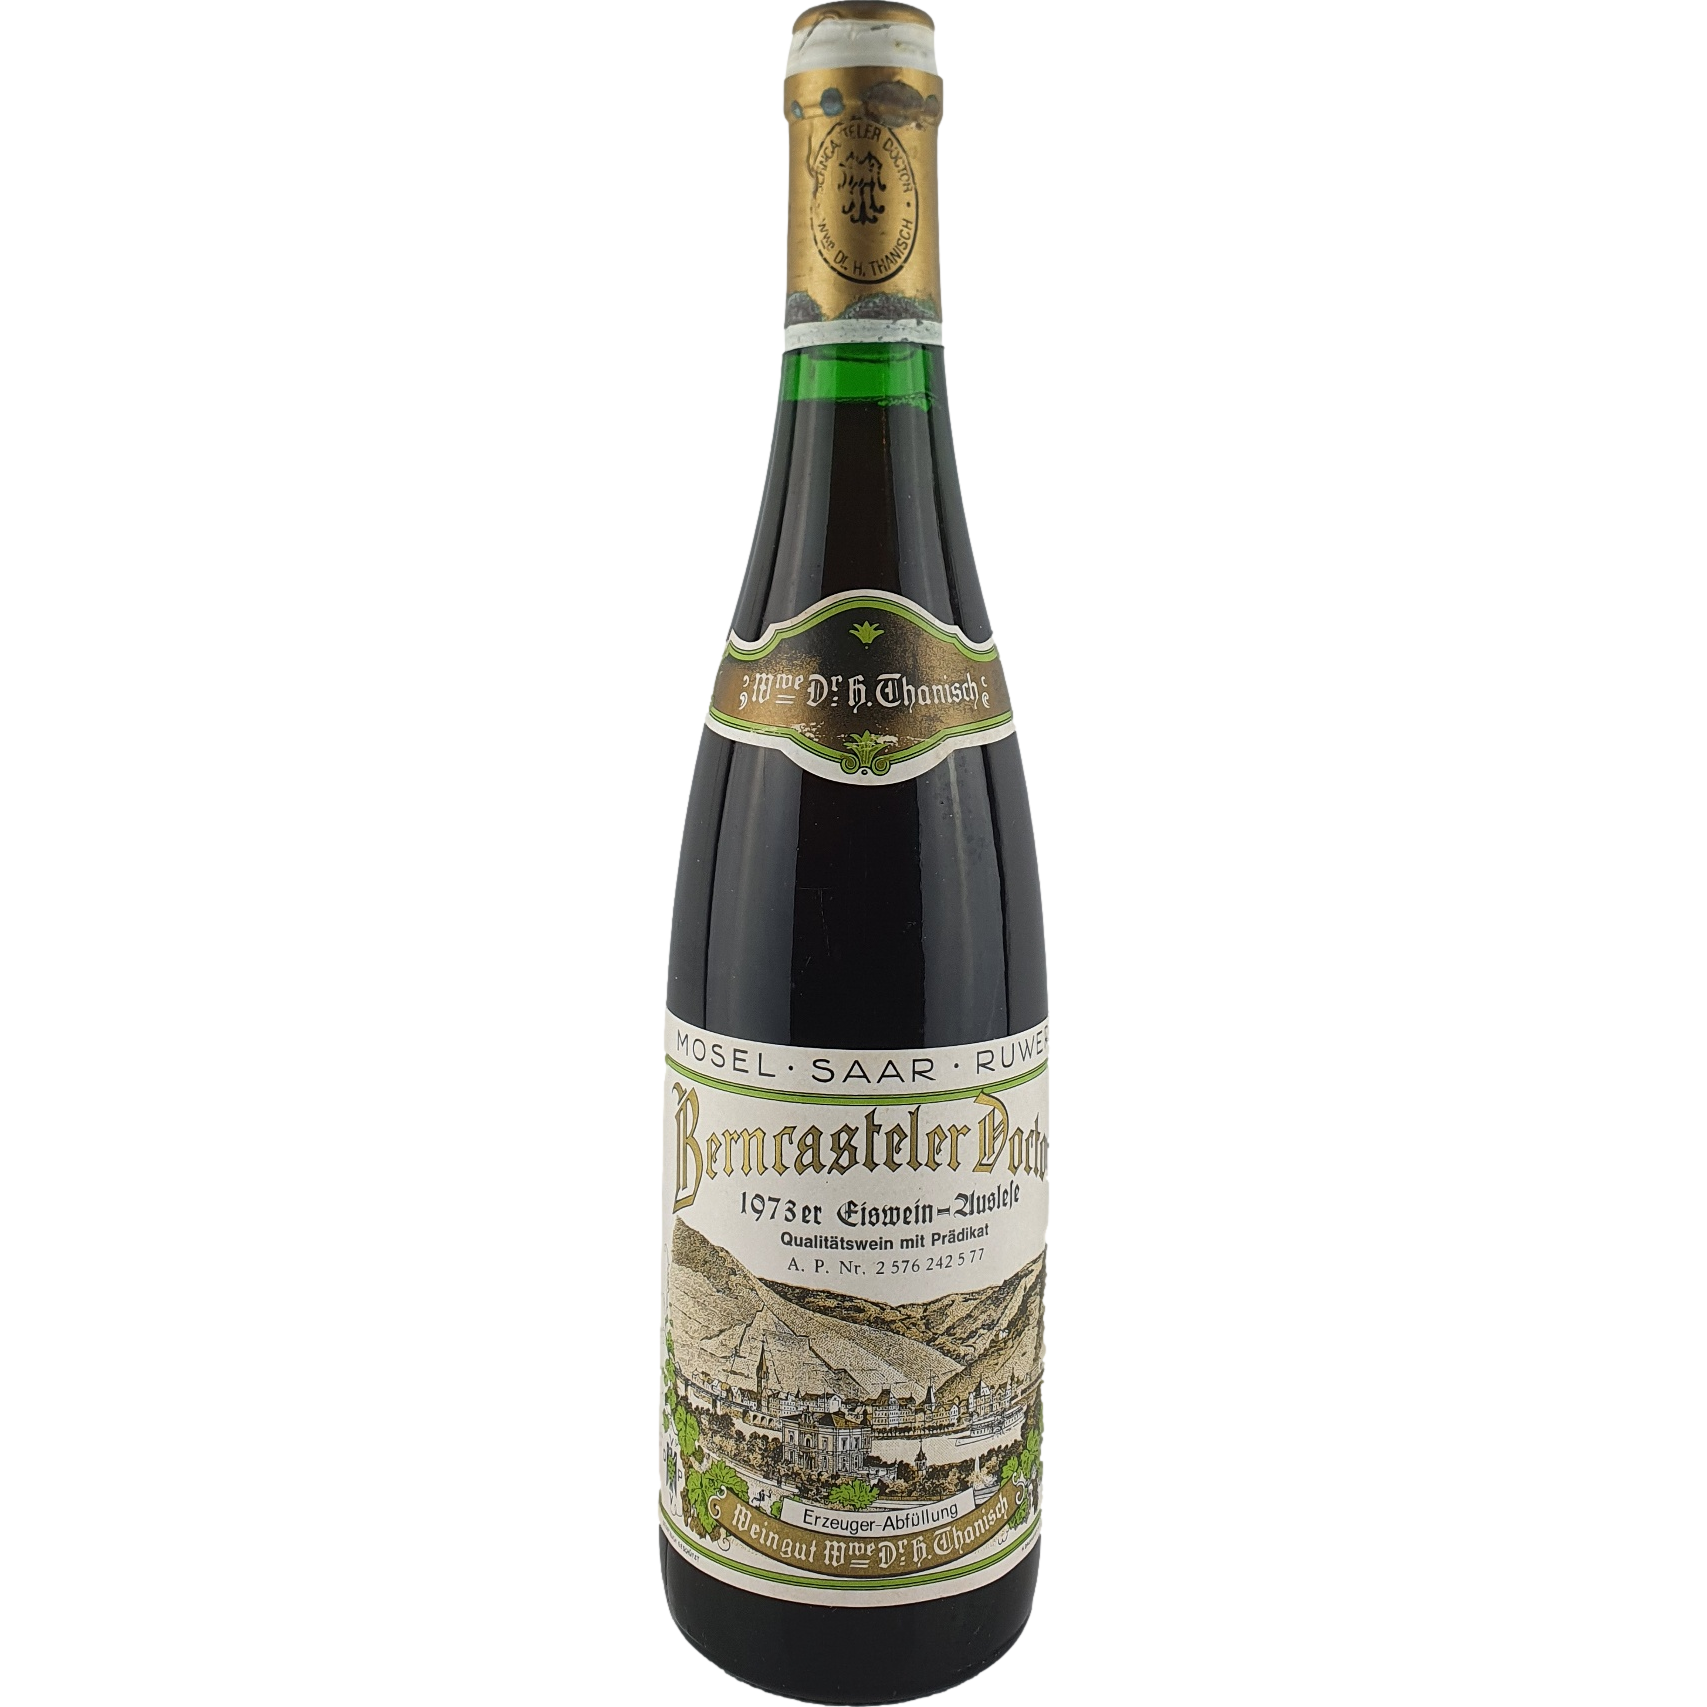 Witwe Dr. H. Thanisch - Berncasteler Doctor Riesling Eiswein-Auslese   1973 - 0,7 l